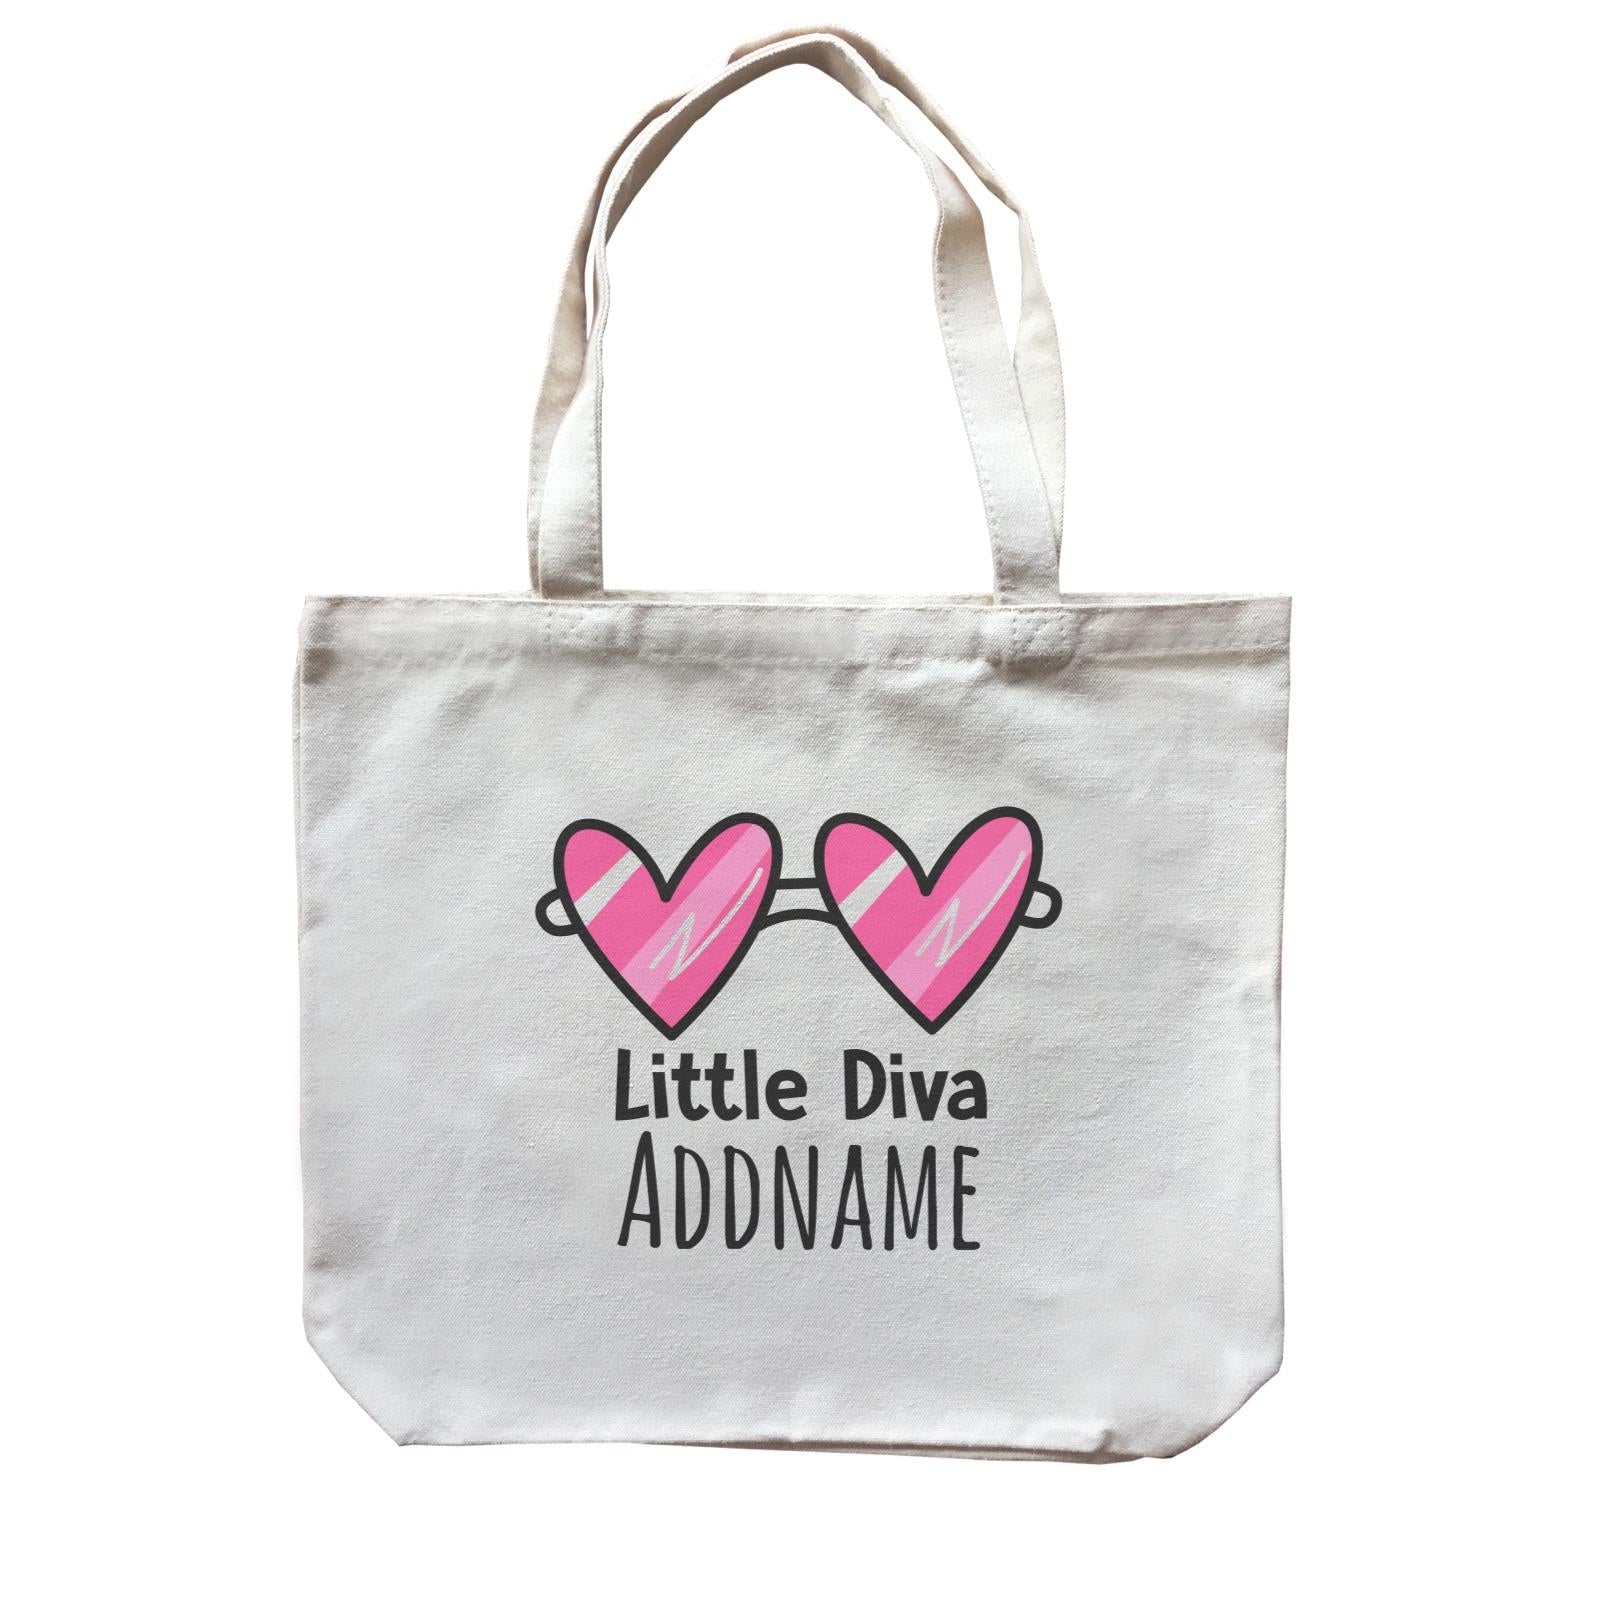 Drawn Baby Elements Little Diva Addname Canvas Bag